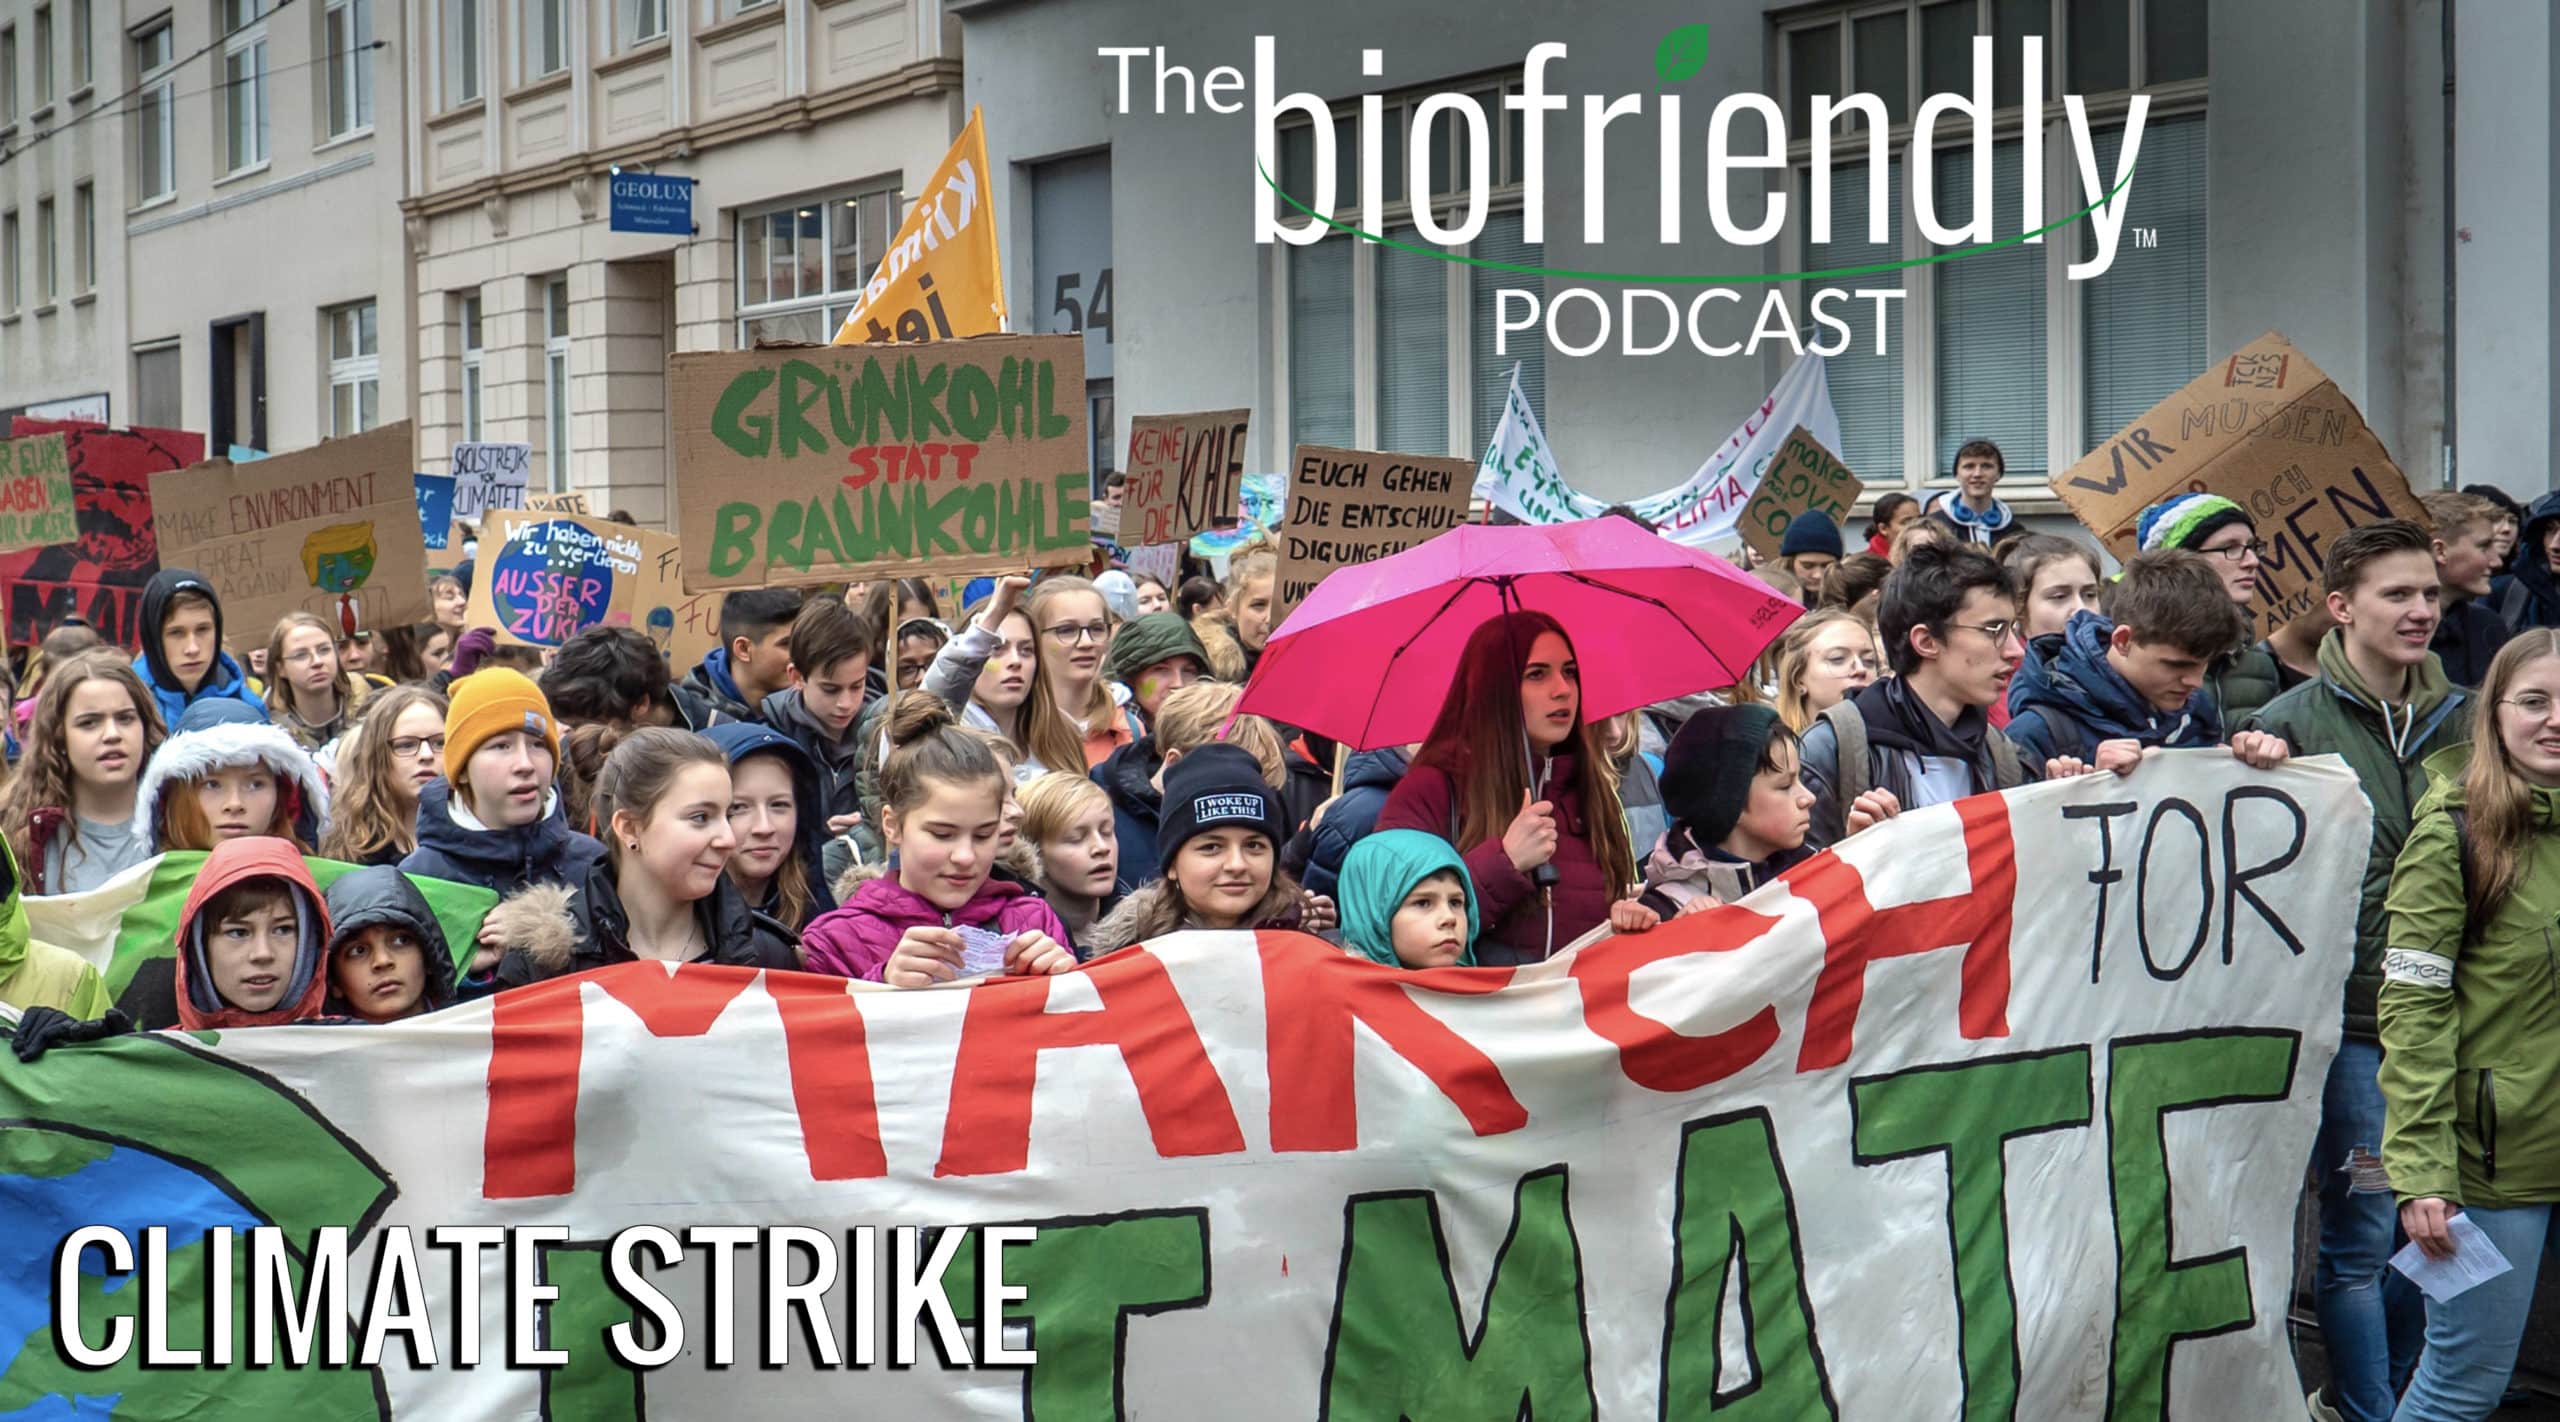 The Biofriendly Podcast - Episode 32 - Climate Strike